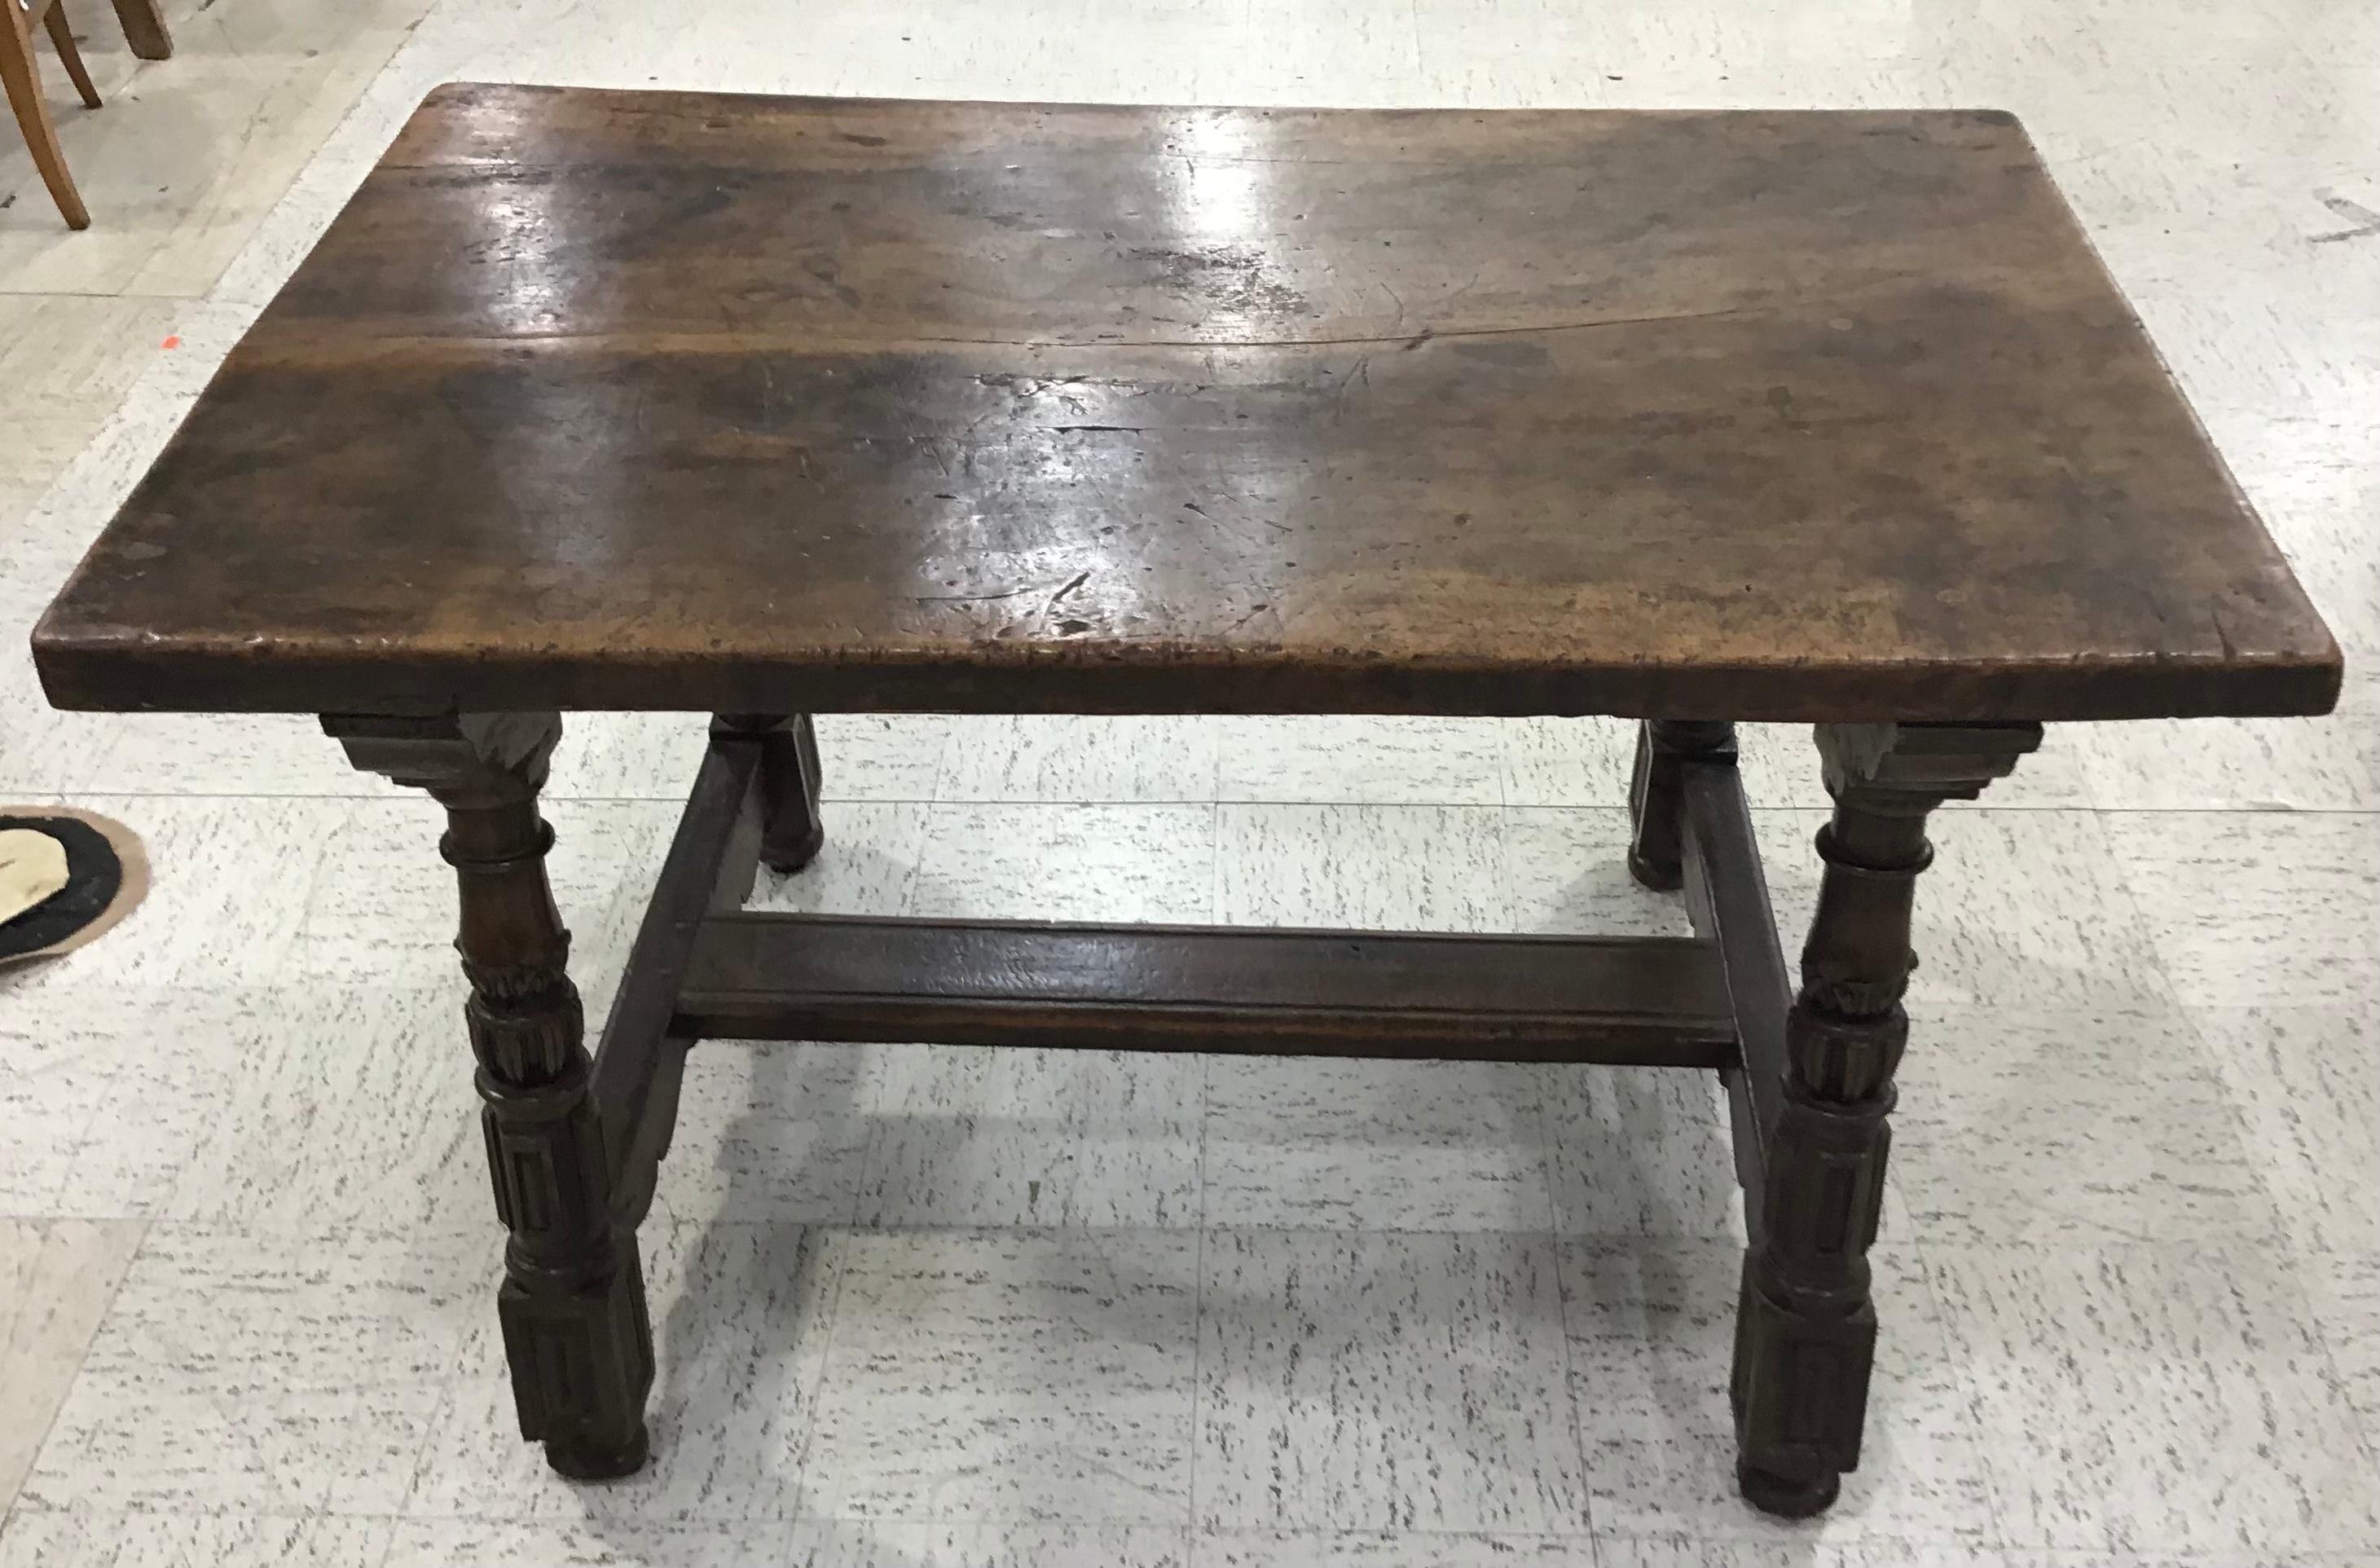 Italian, 18th century. Baroque walnut dining or tavern table having a thick walnut top above turned legs with Walnut stretcher. Perfect size to use as a writing table, sofa or center table.